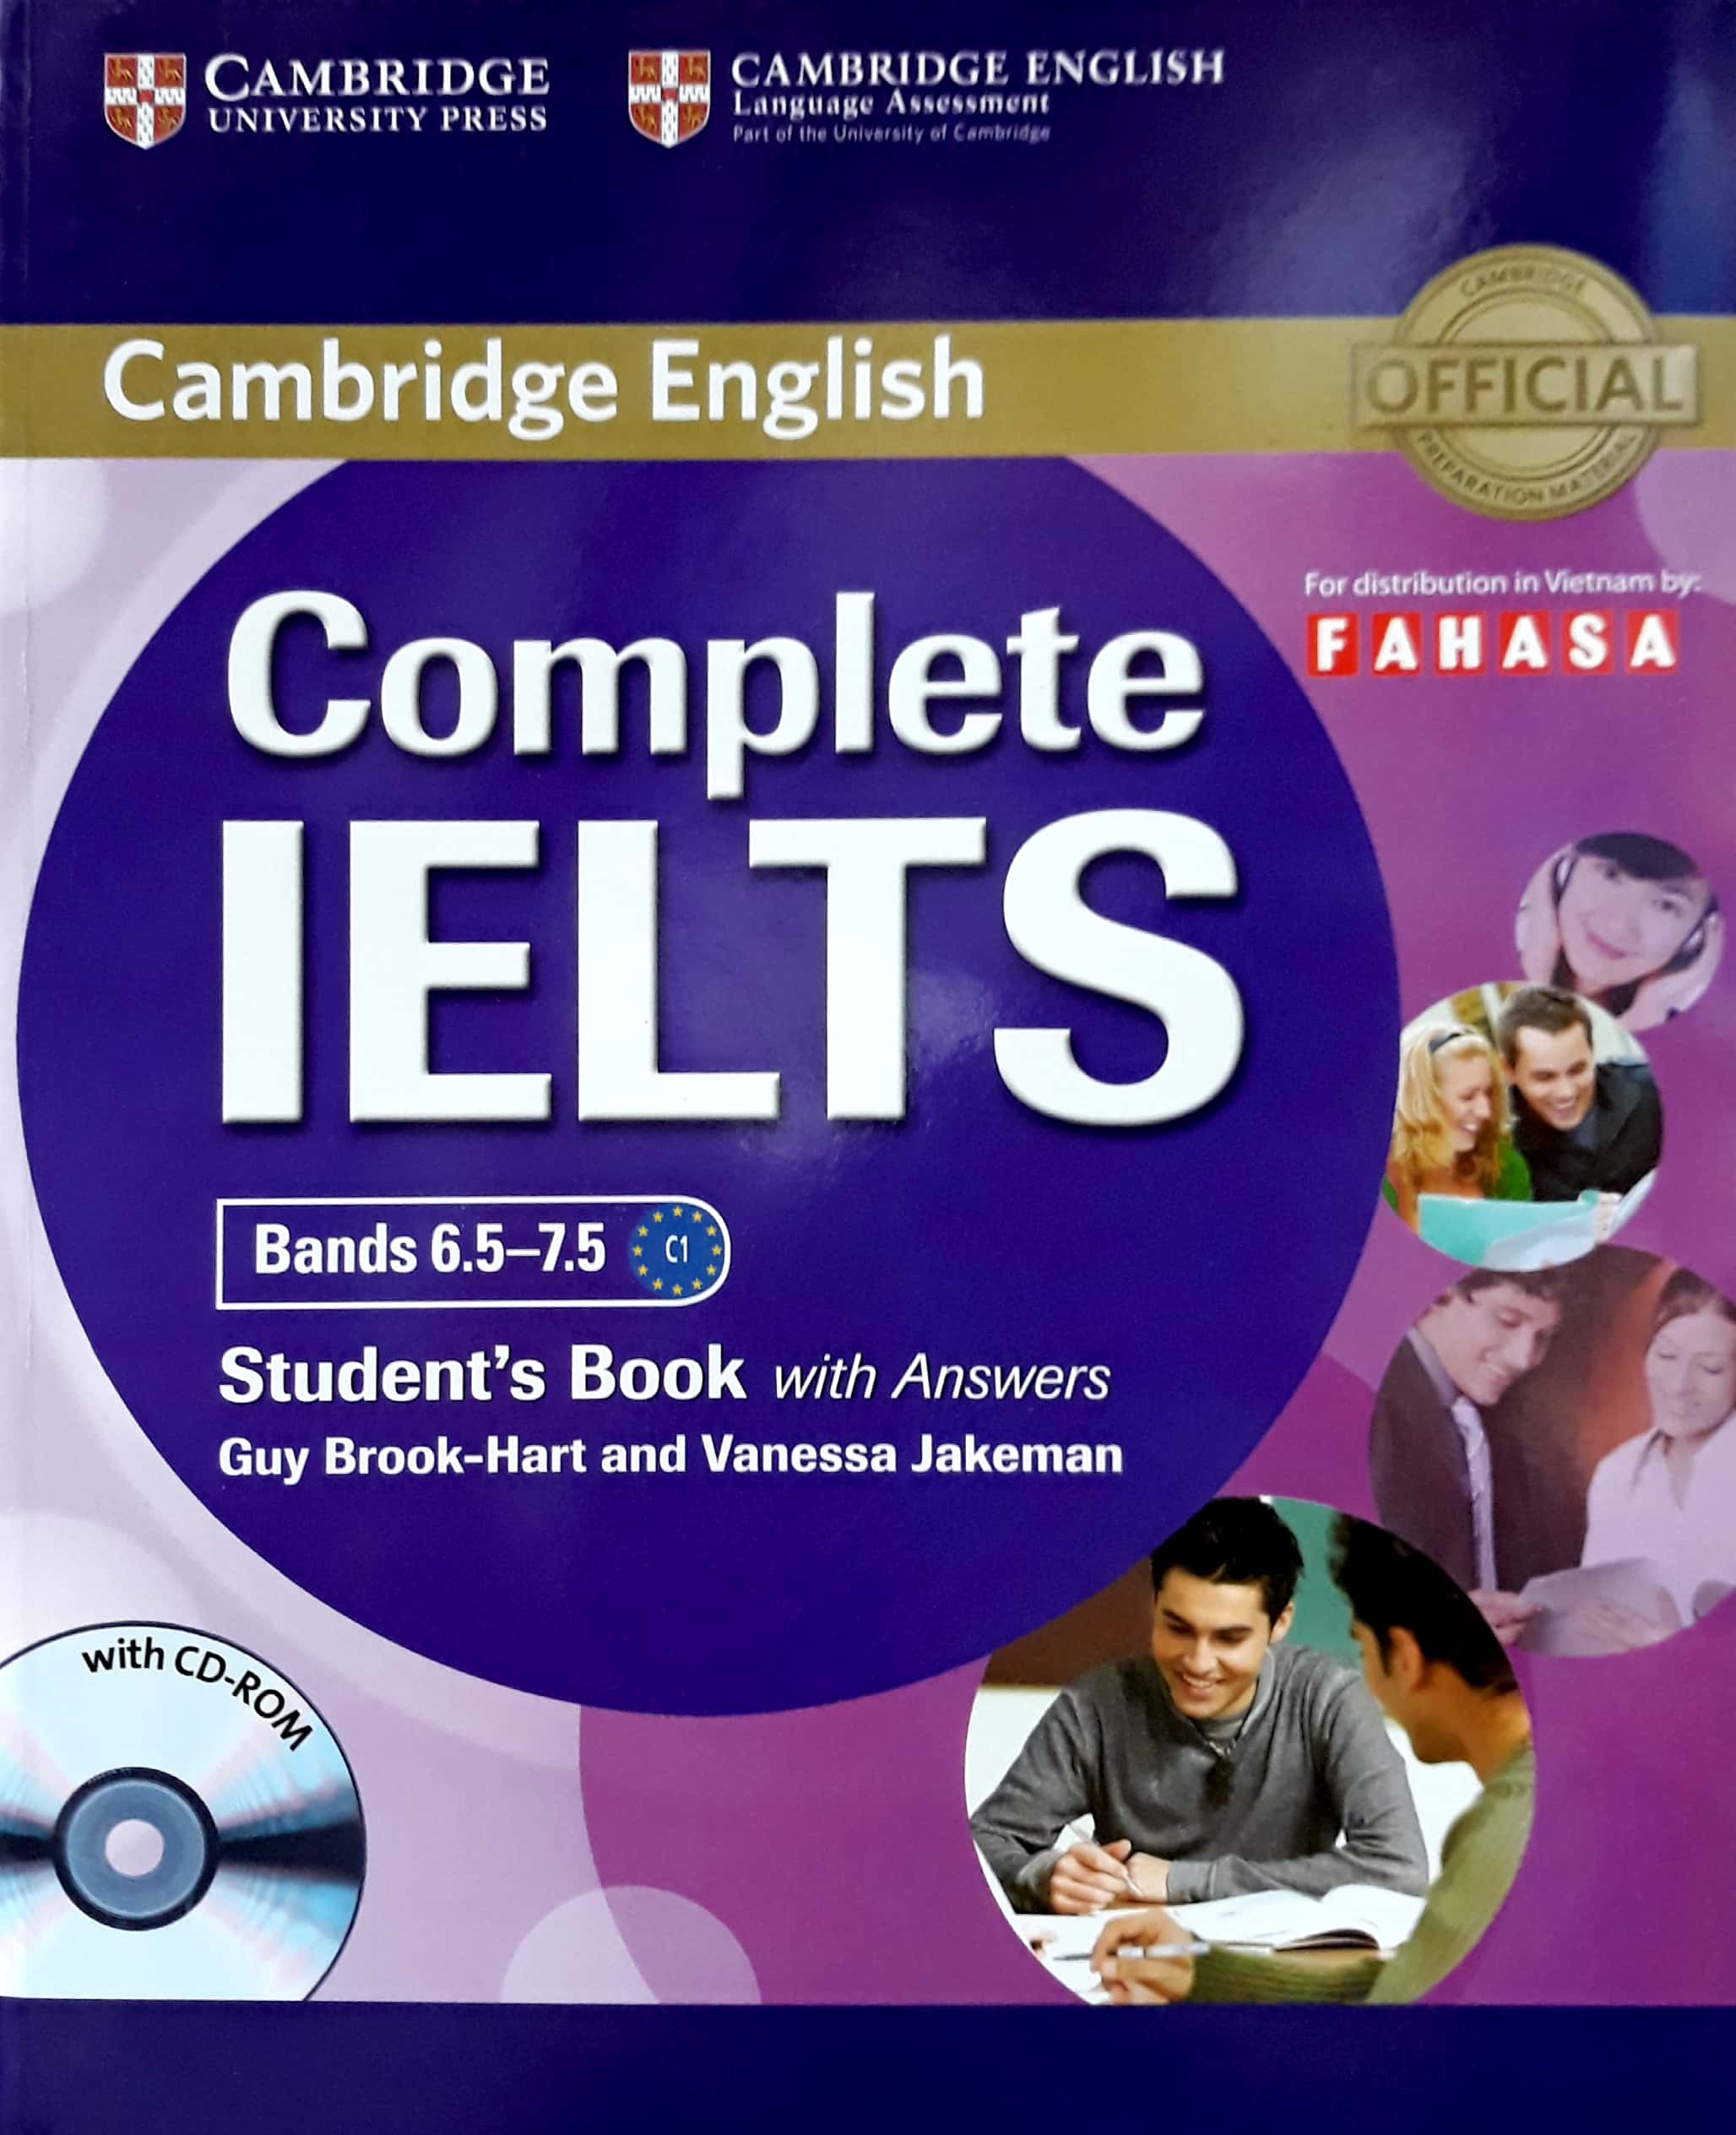 Complete IELTS Bands 6.5-7.5 (C1) SB with Answer & CD-ROM